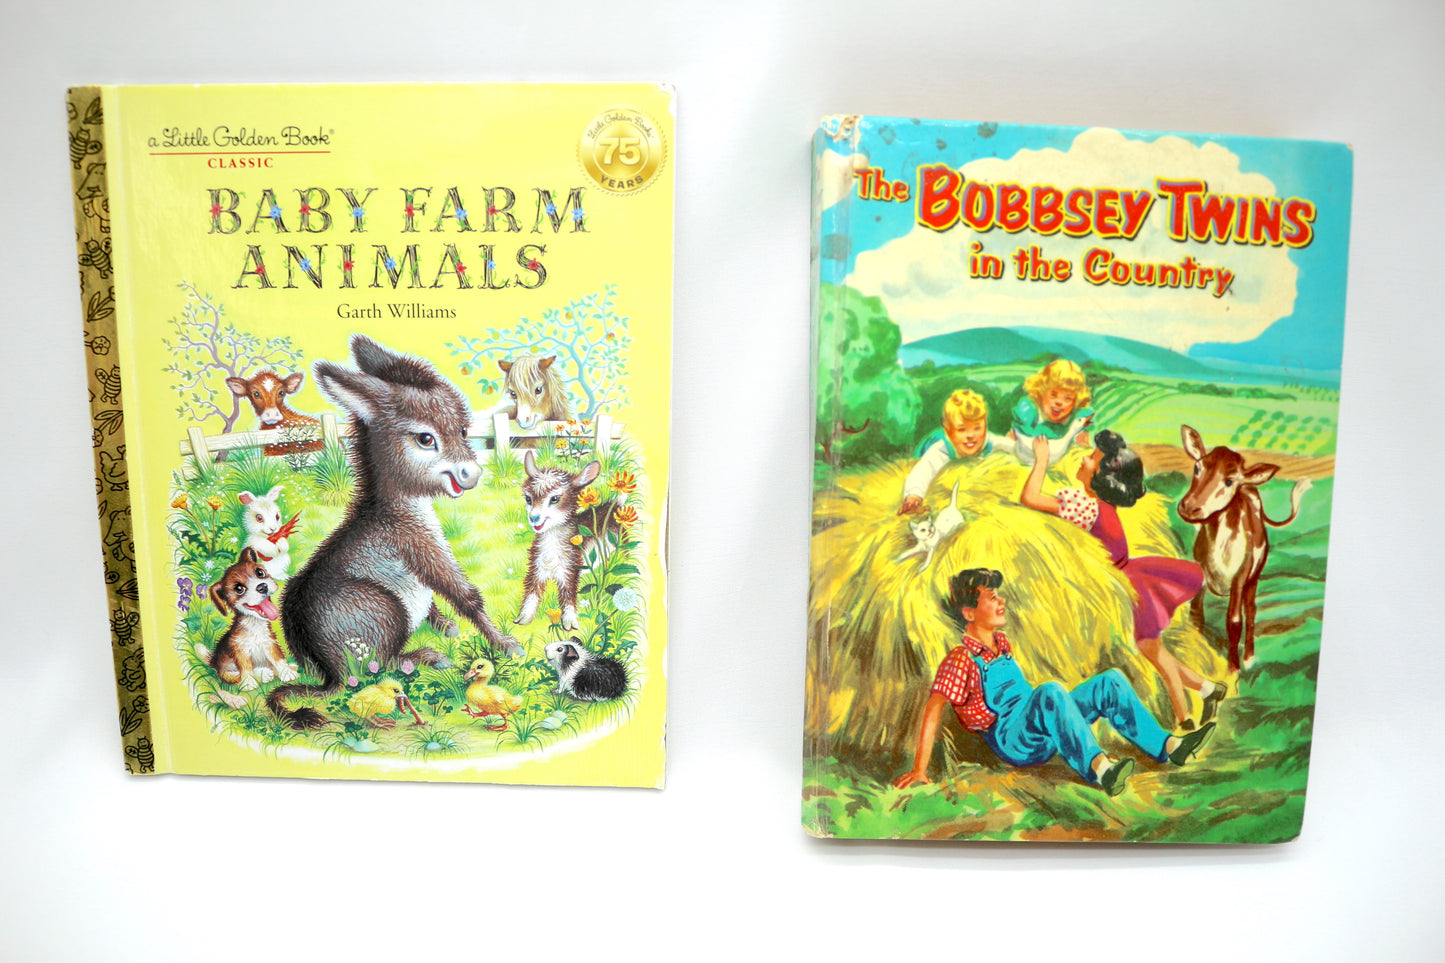 Little Golden Book Baby Farm Animals OR The Bobbsey Twins in the Country